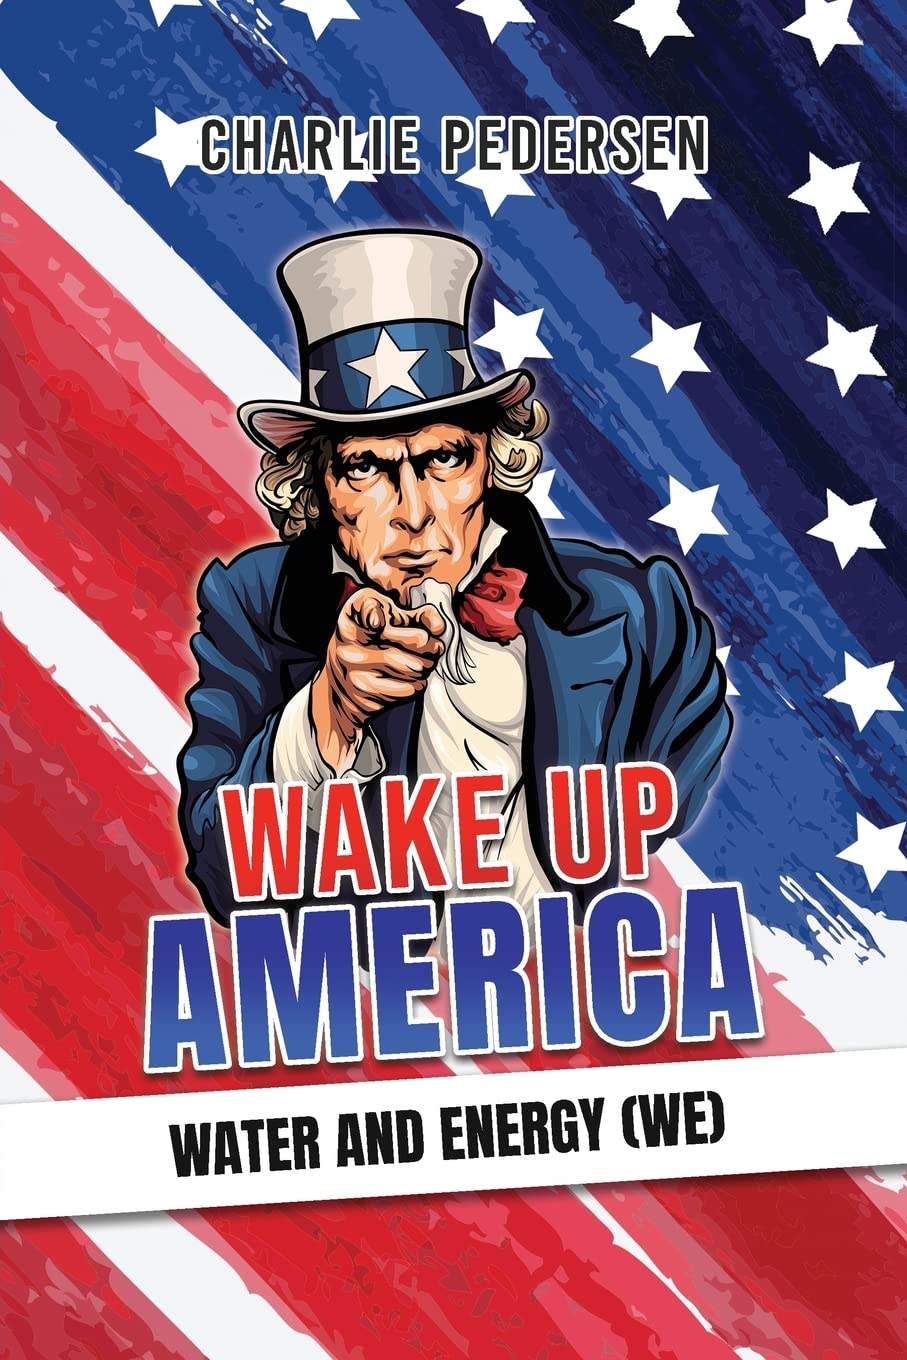 Author's Tranquility Press presents Wake Up America - Water and Energy (WE) by Charlie Pedersen